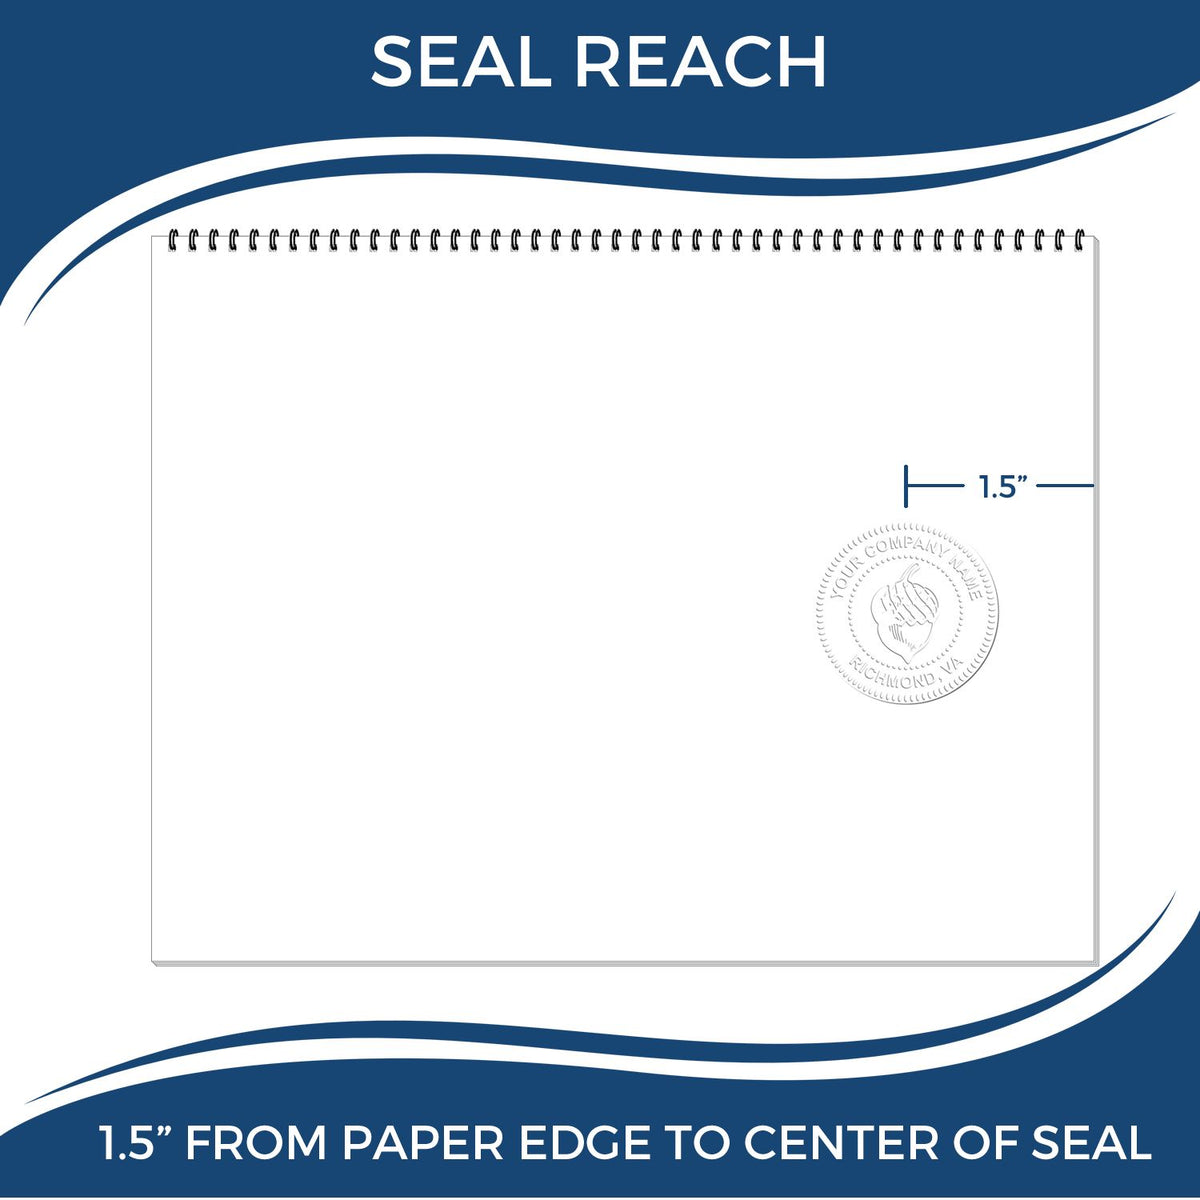 An infographic showing the seal reach which is represented by a ruler and a miniature seal image of the Gift North Carolina Engineer Seal